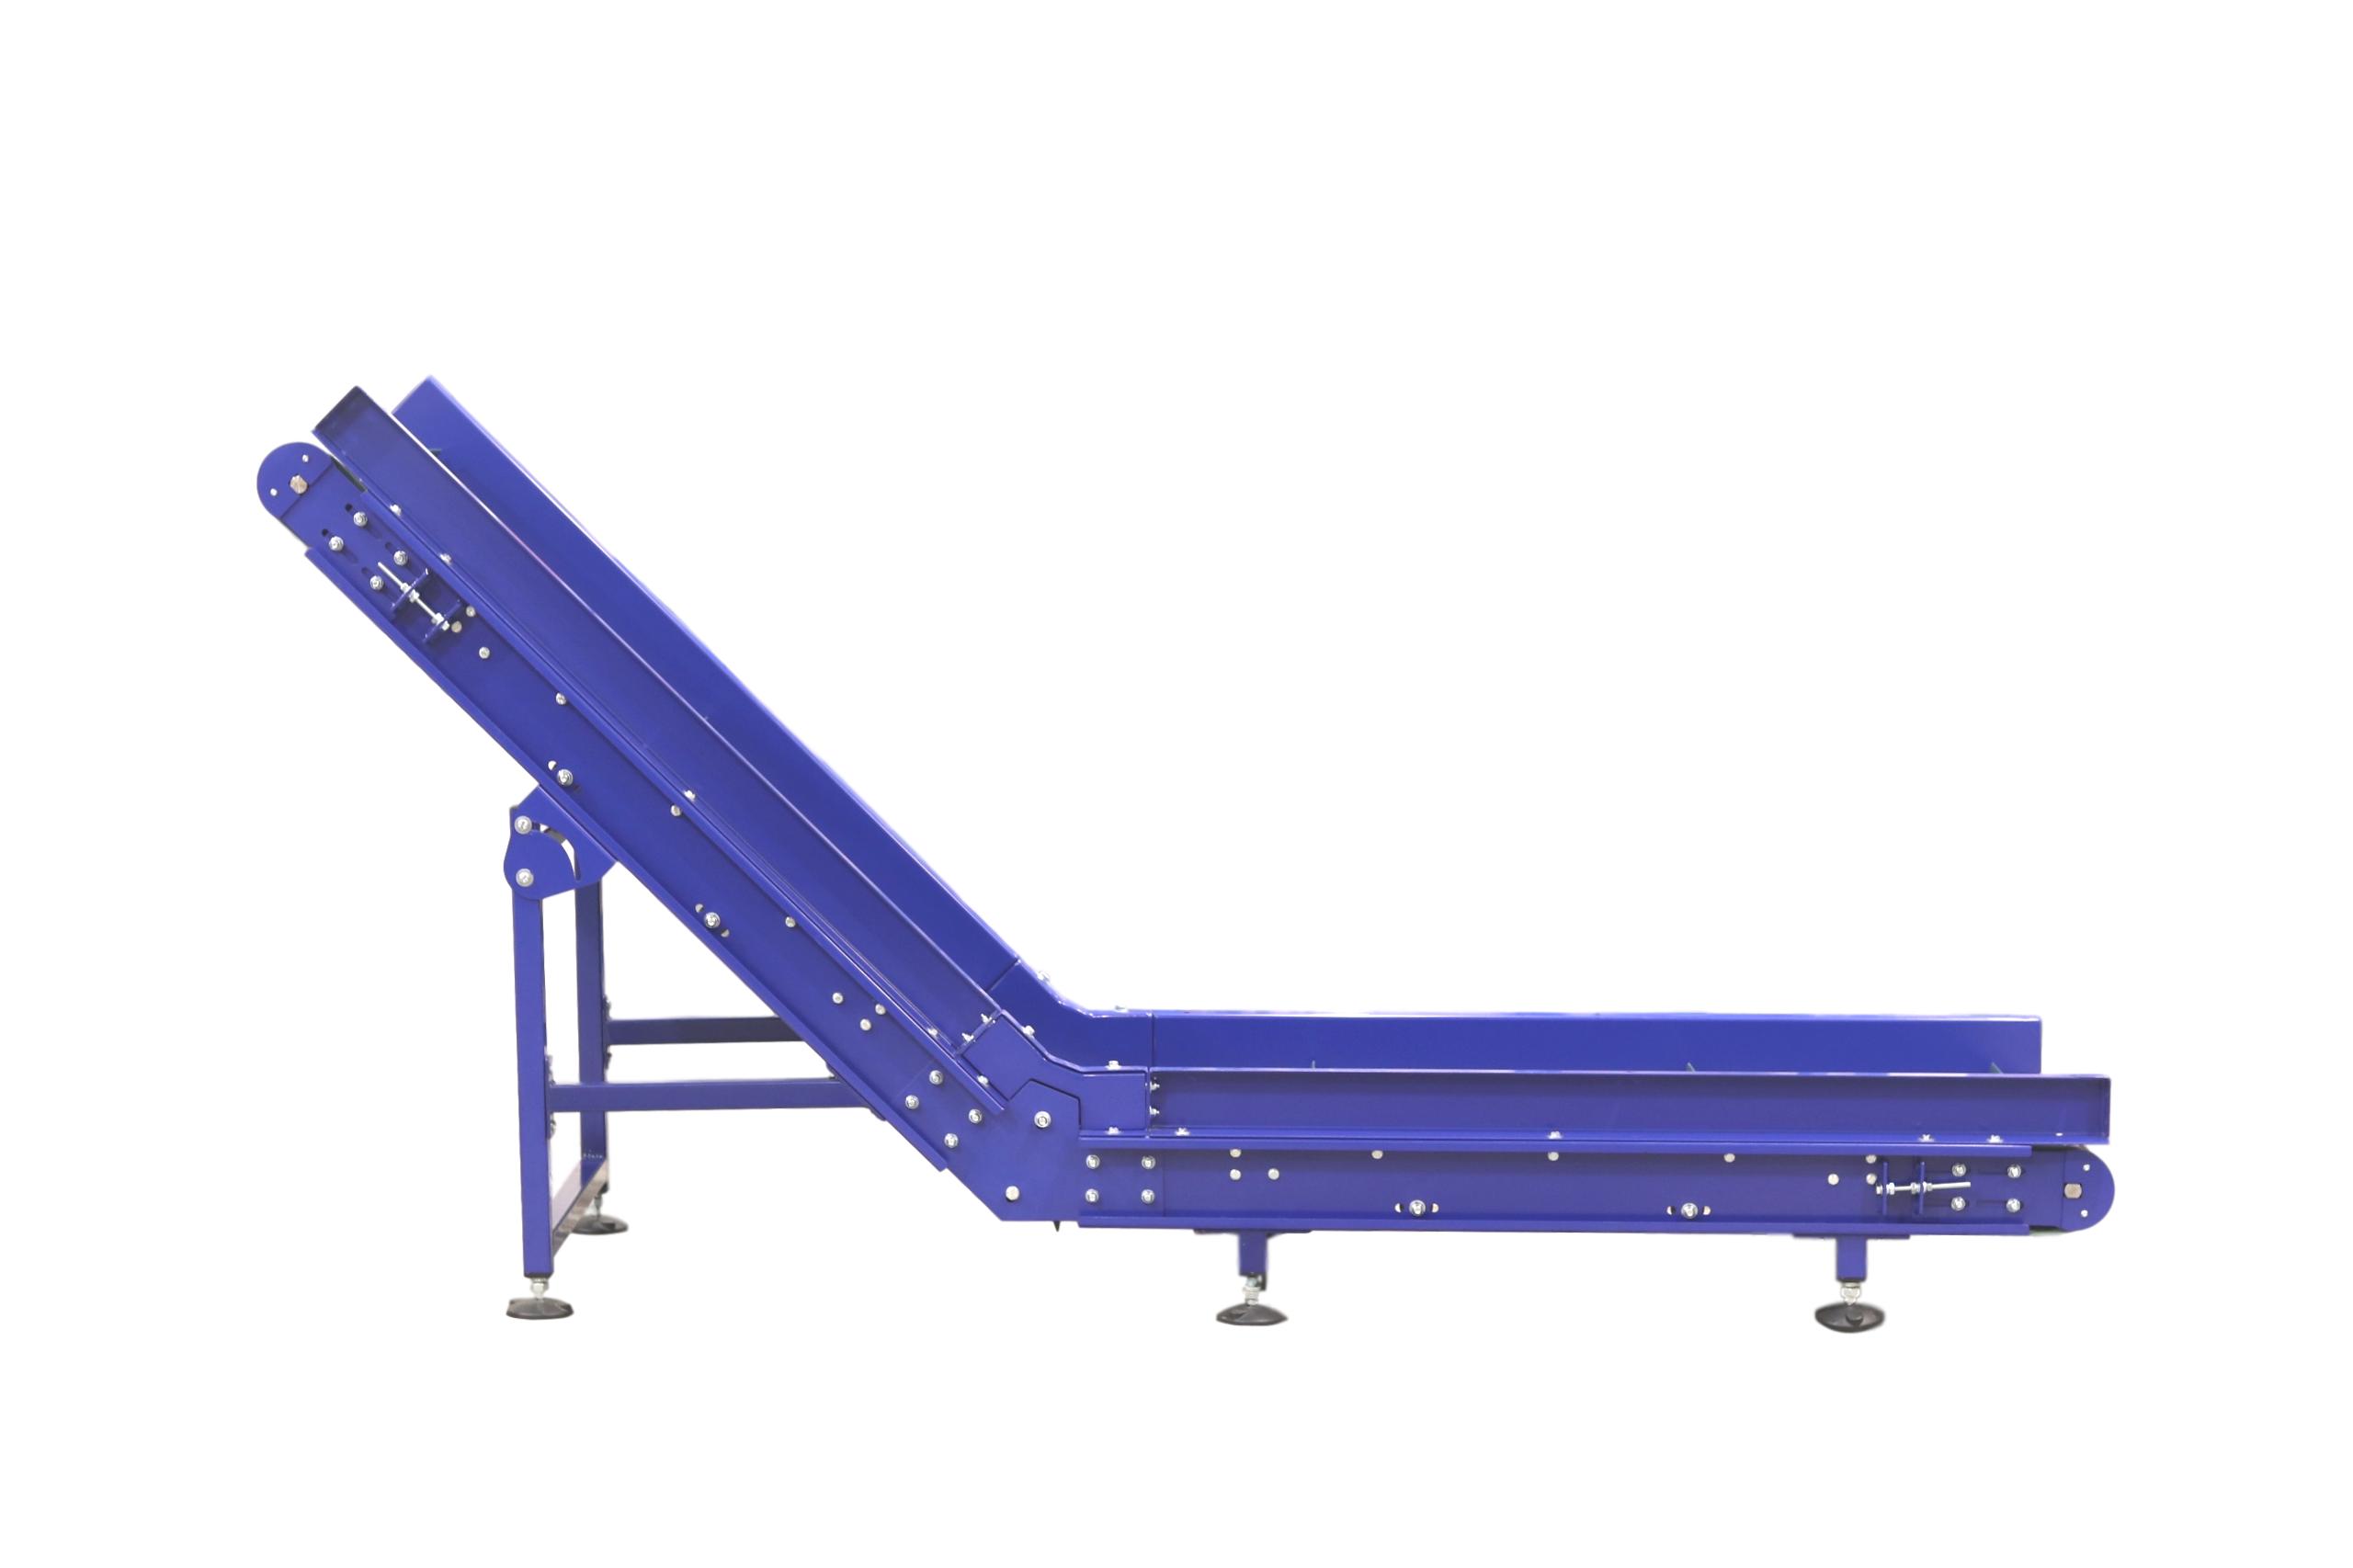 Inclined Infeed conveyor swan conveyor out feed conveyor with flighted belting cleated belt